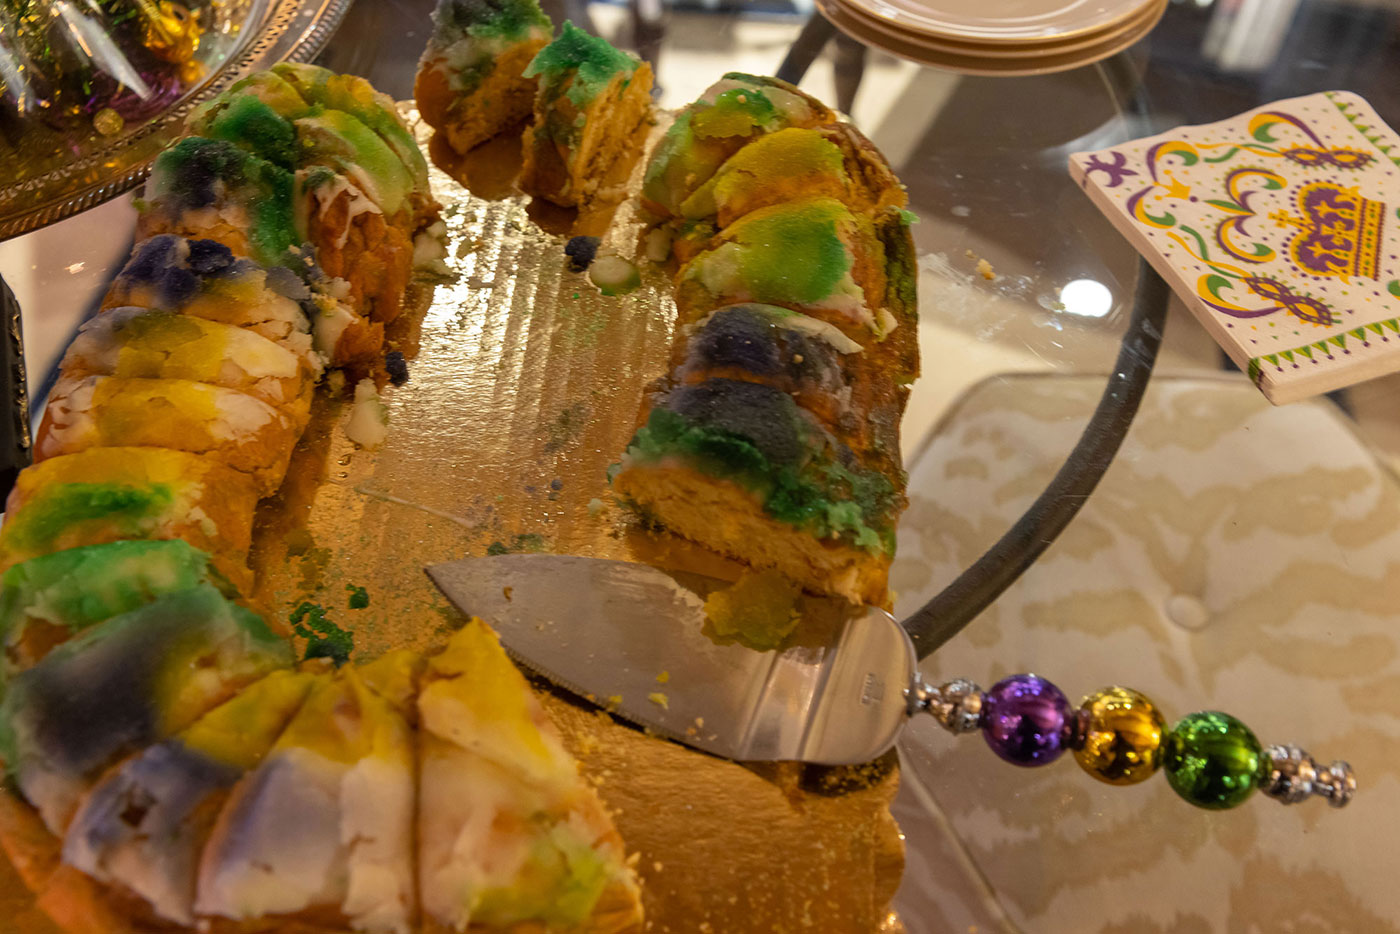 Celebrating Fat Tuesday with King's Cake 